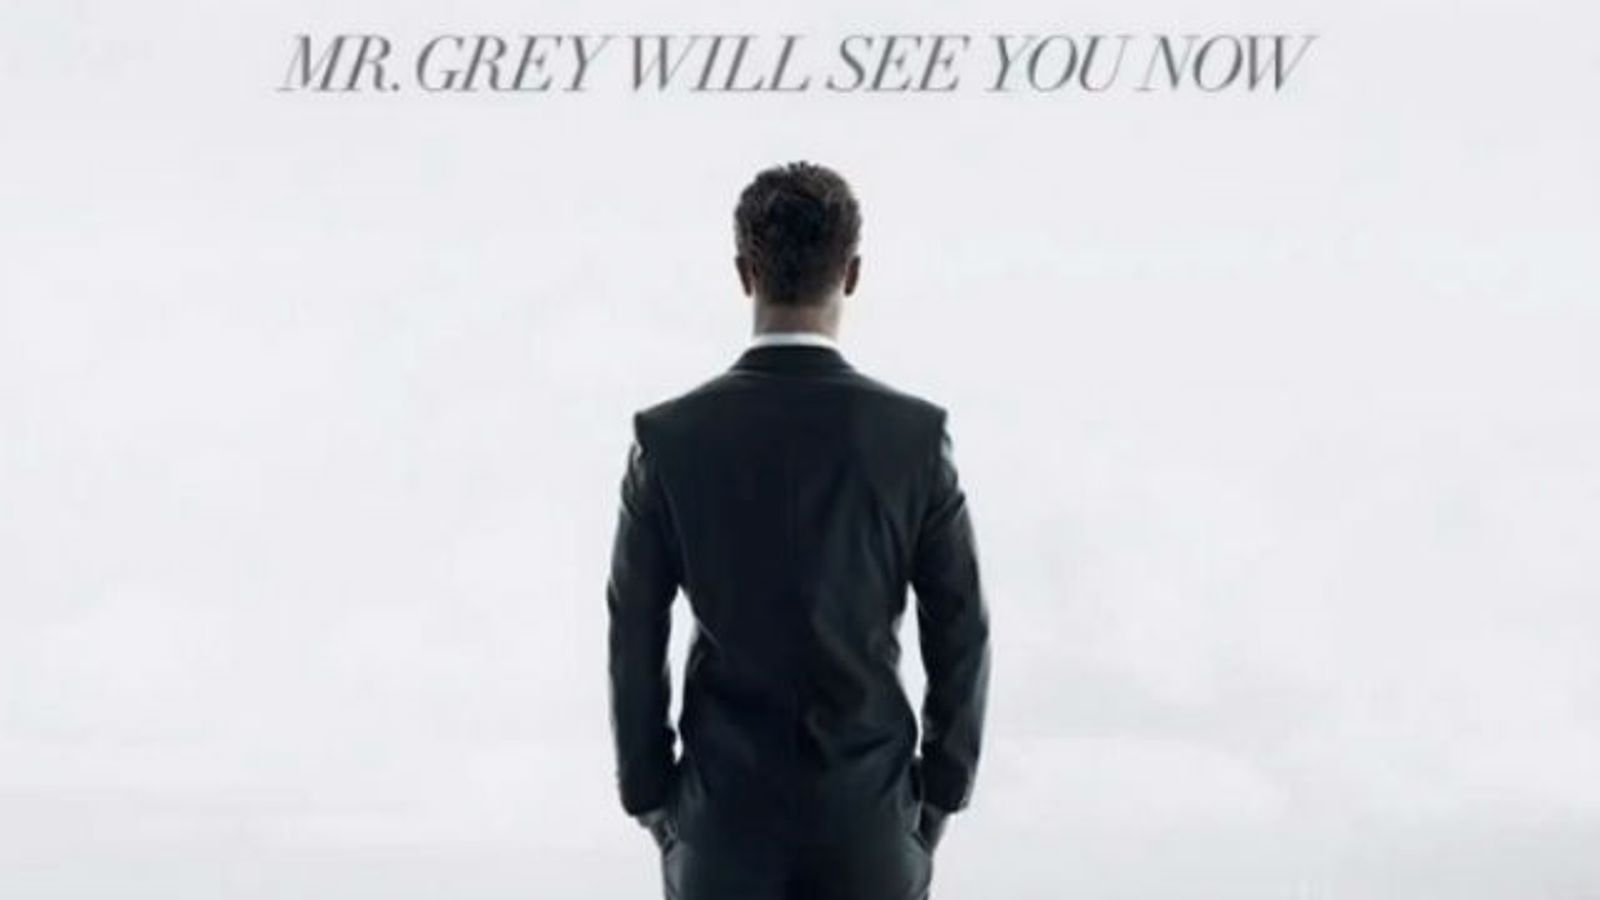 Morality in Media Warns Against Watching '50 Shades' Trailer